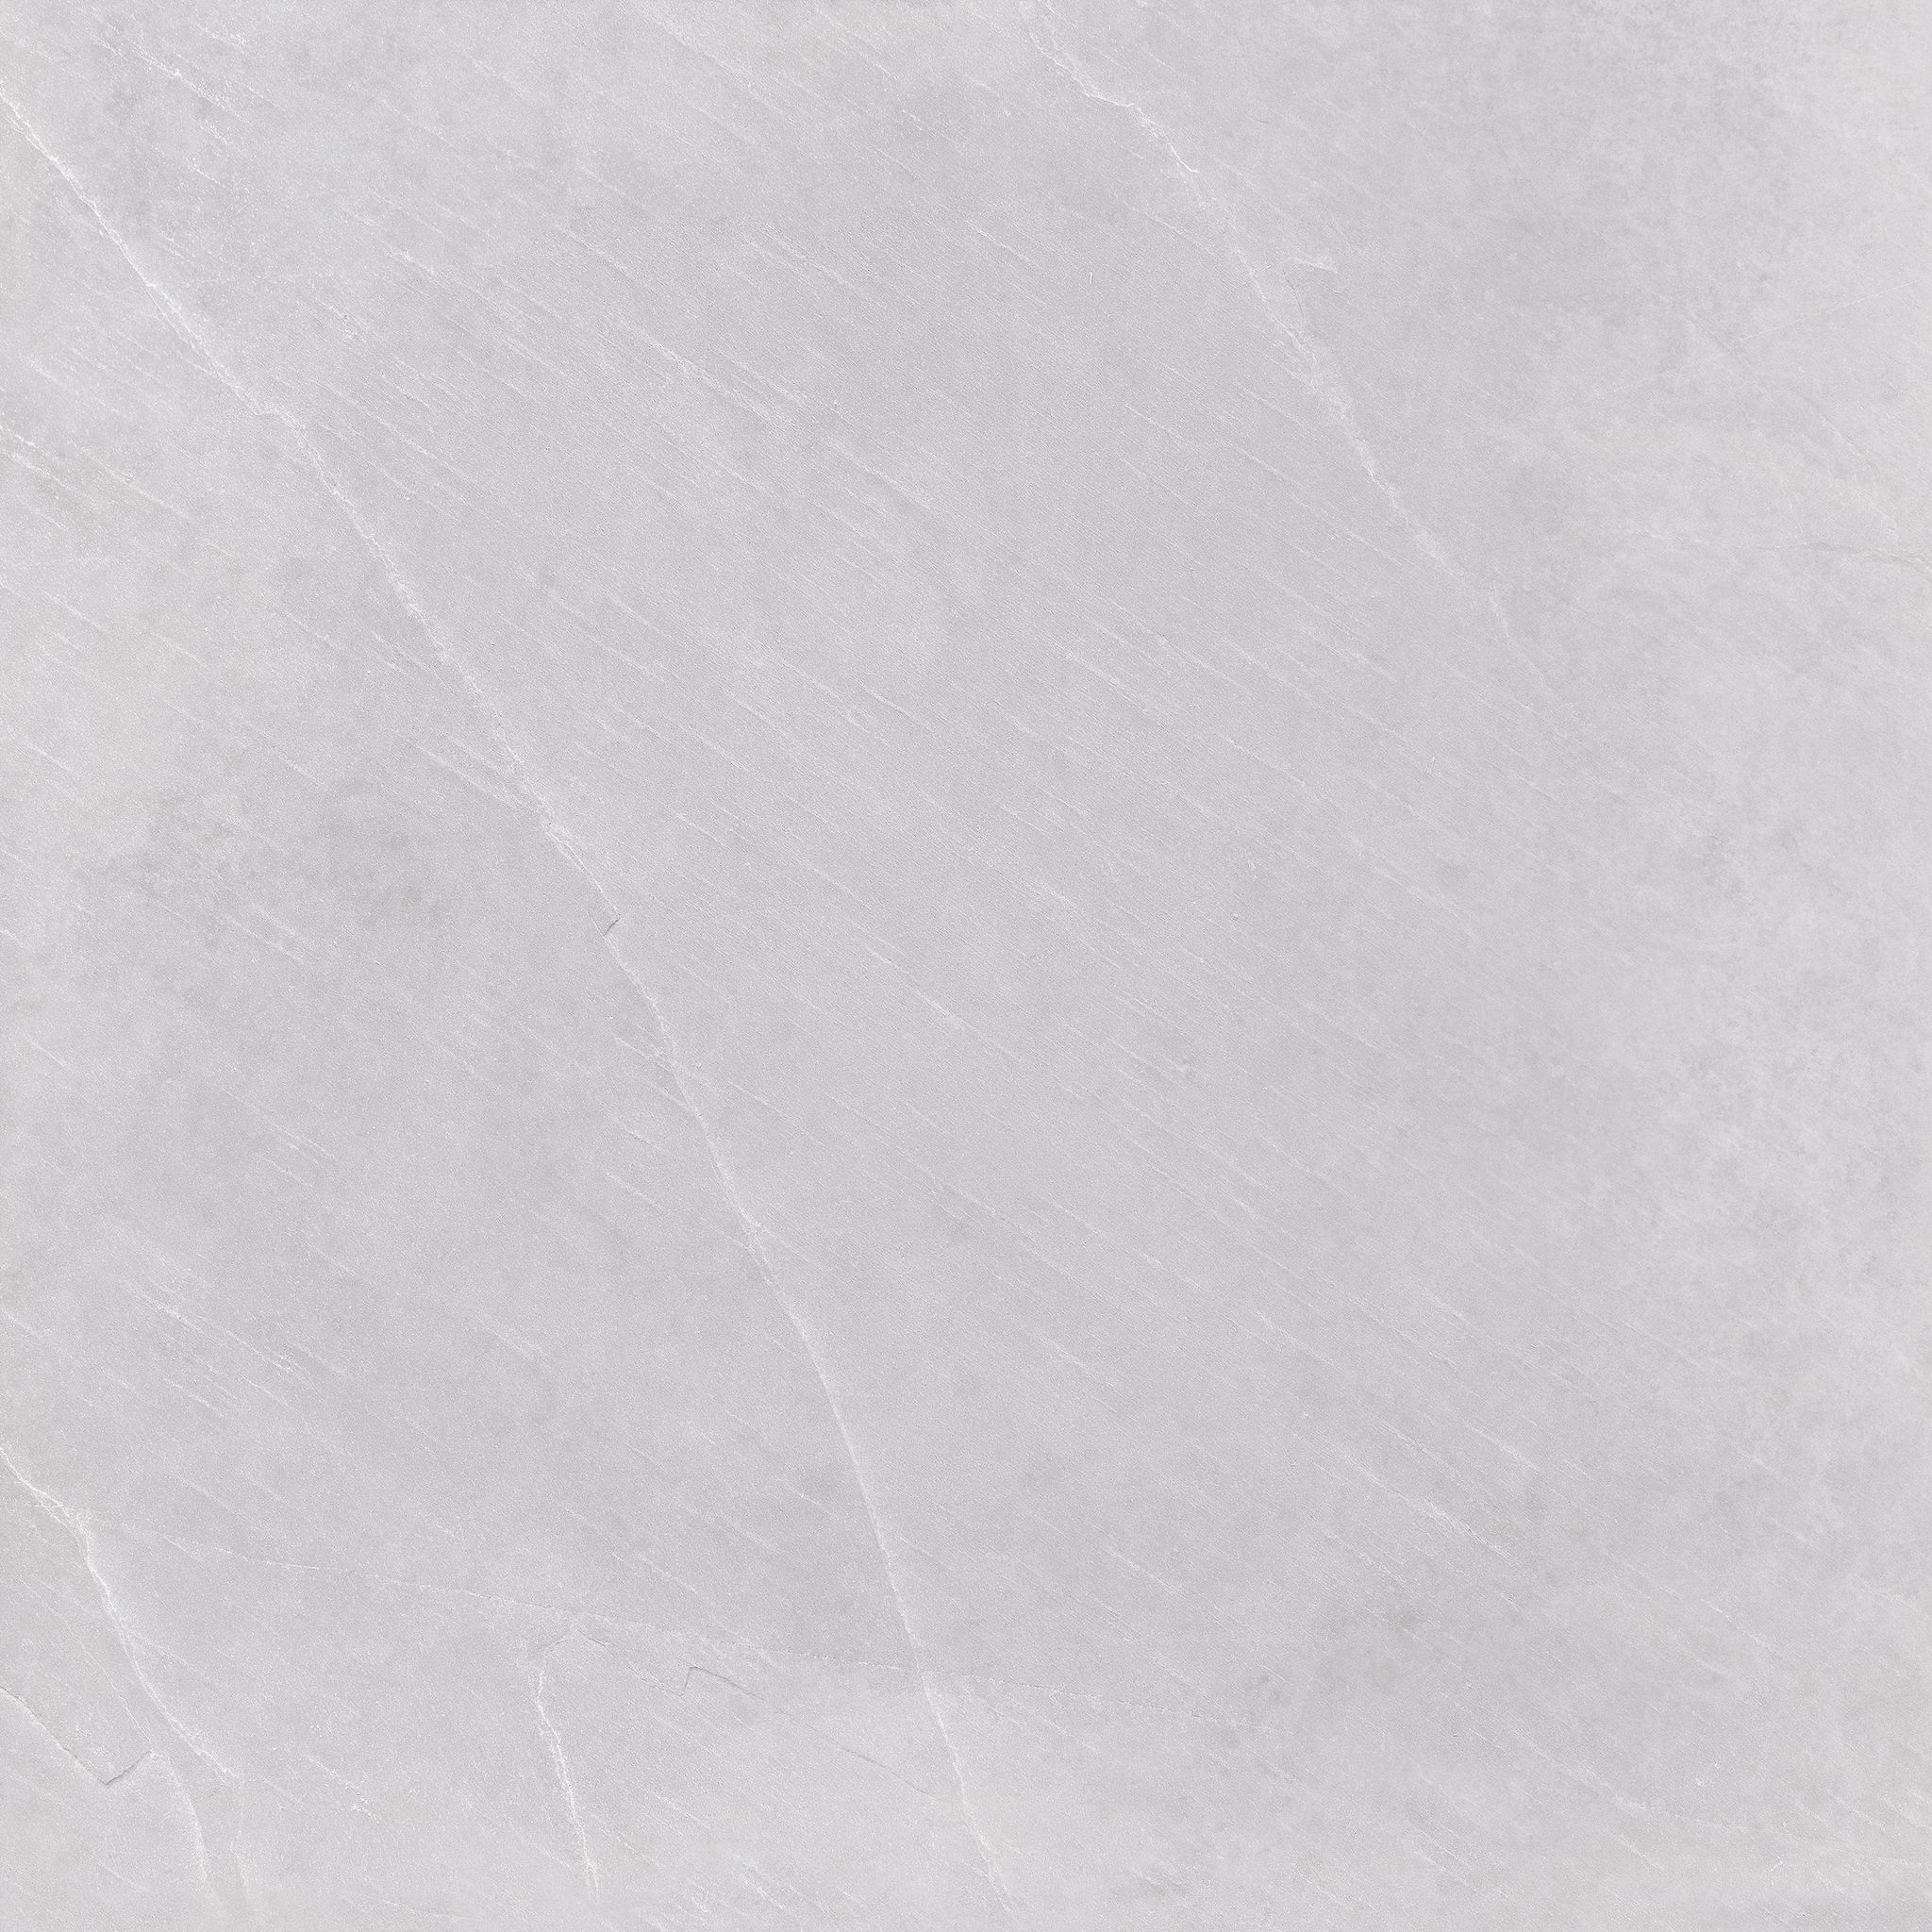 Statale Pearl 24x24 Matte Rectified Porcelain Tile